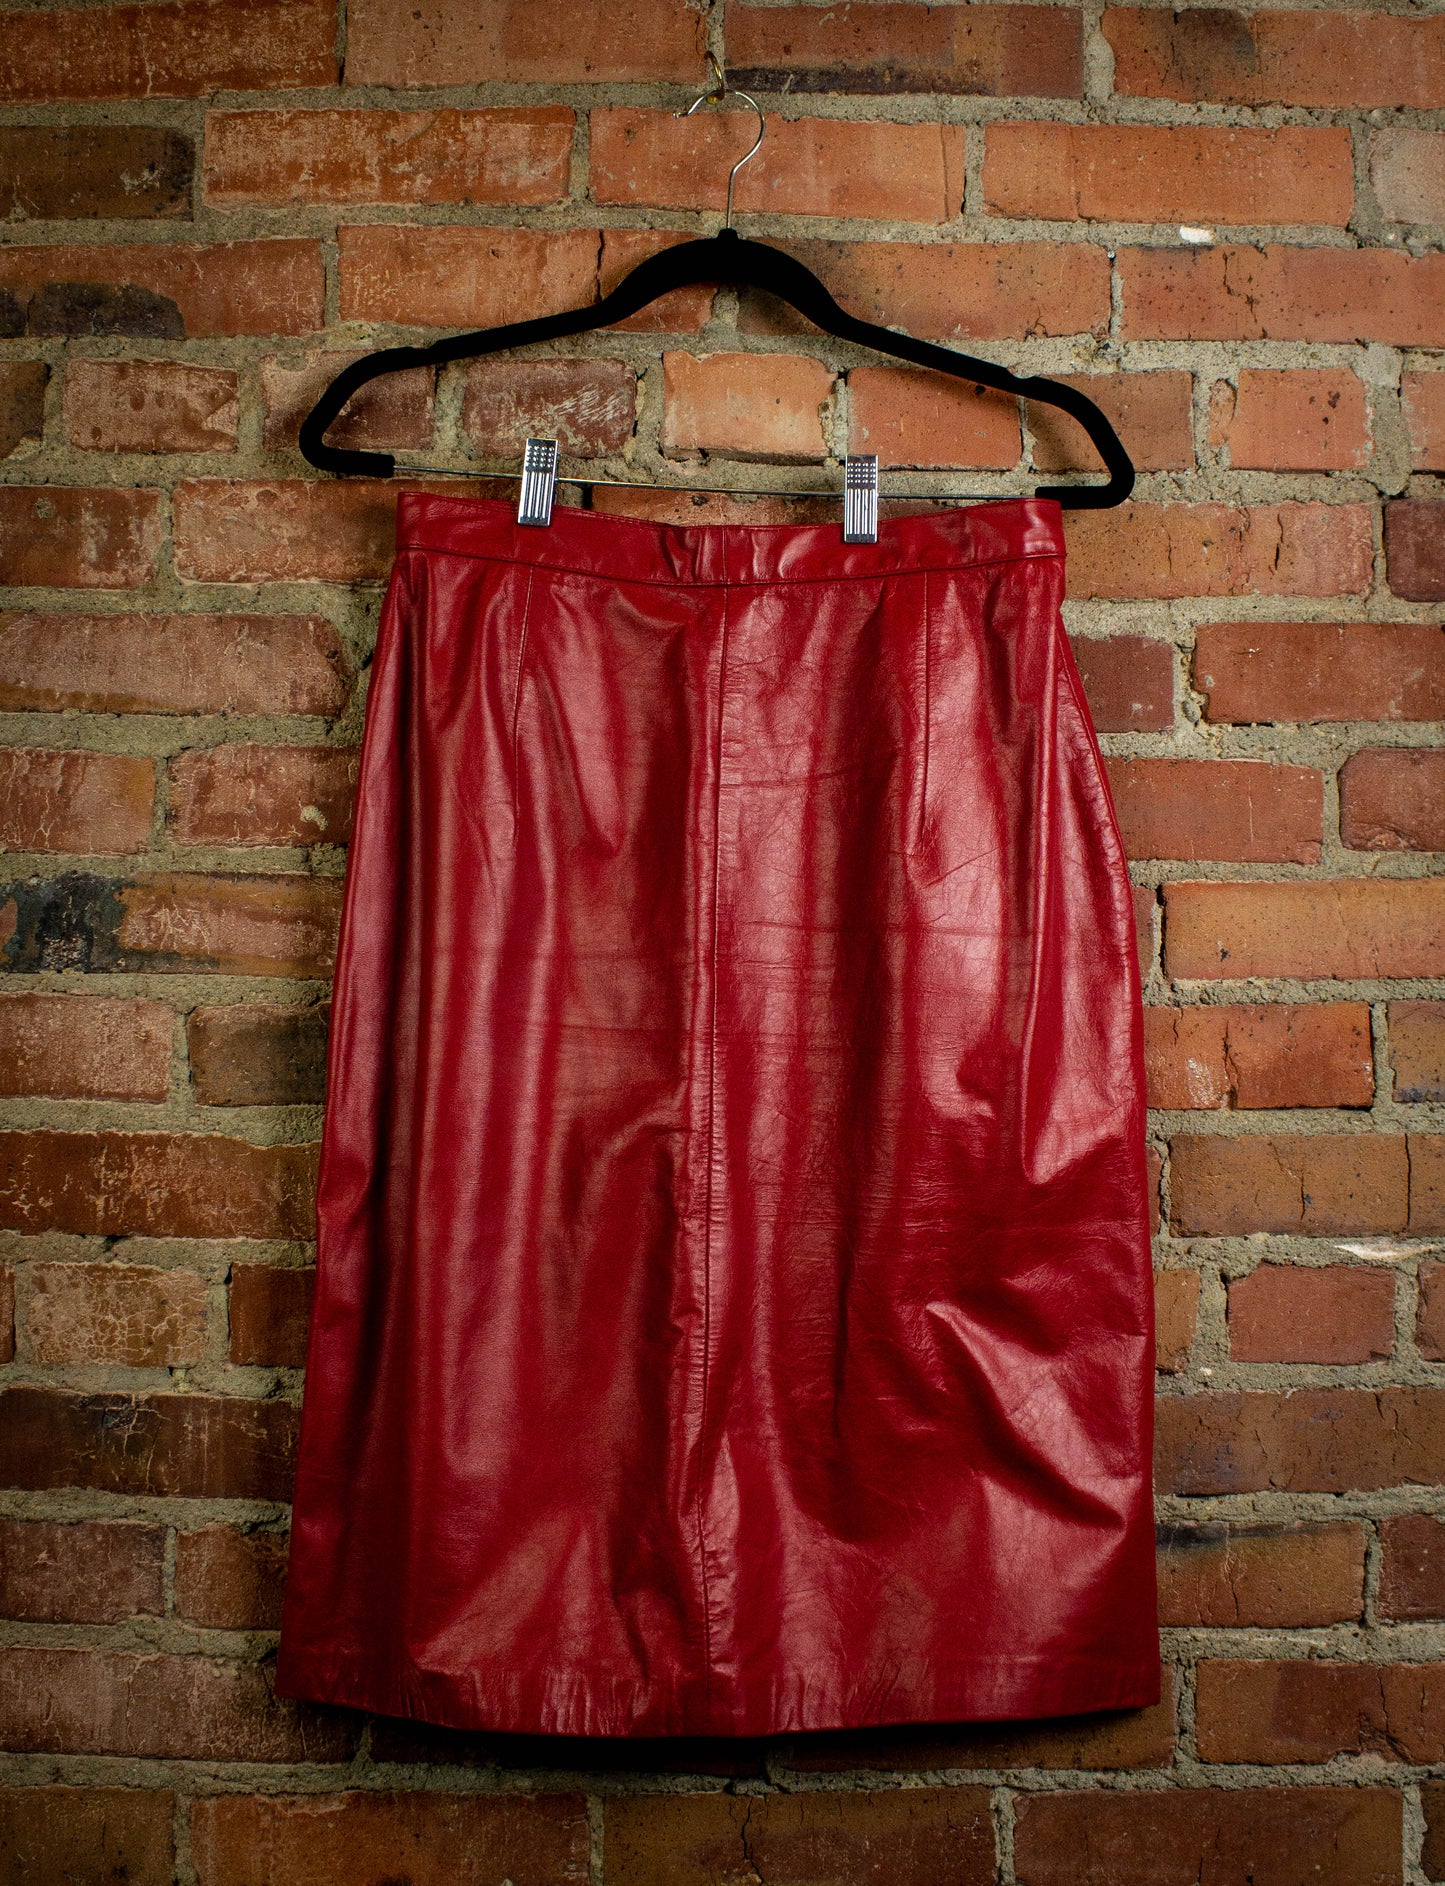 Vintage Wilsons Red Leather Two Piece 1980s Small